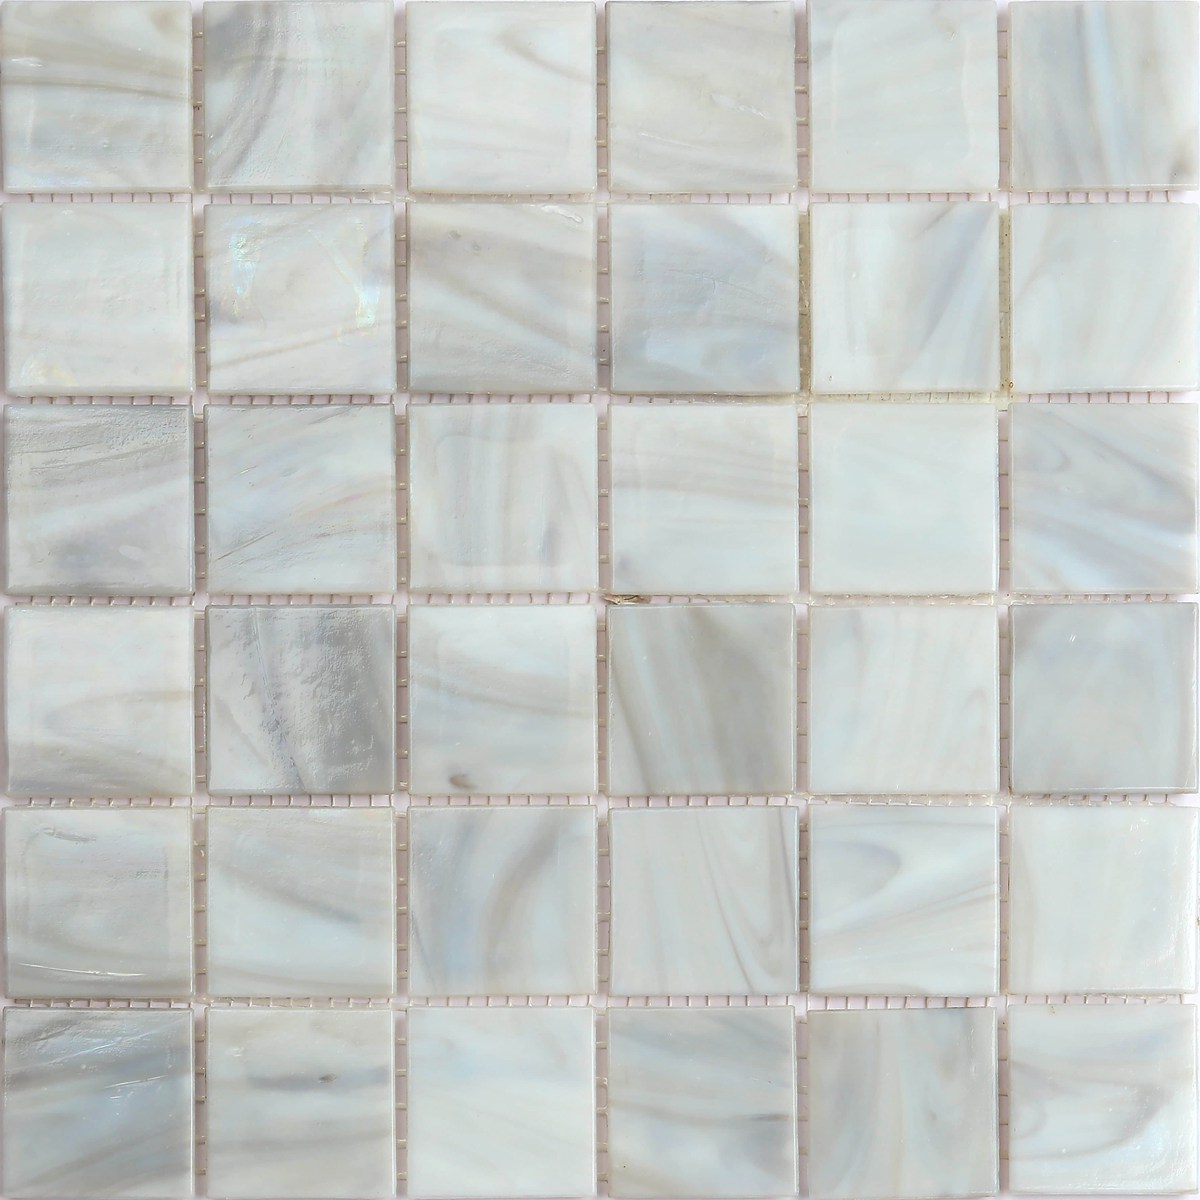 Square mosaic tiles for walls